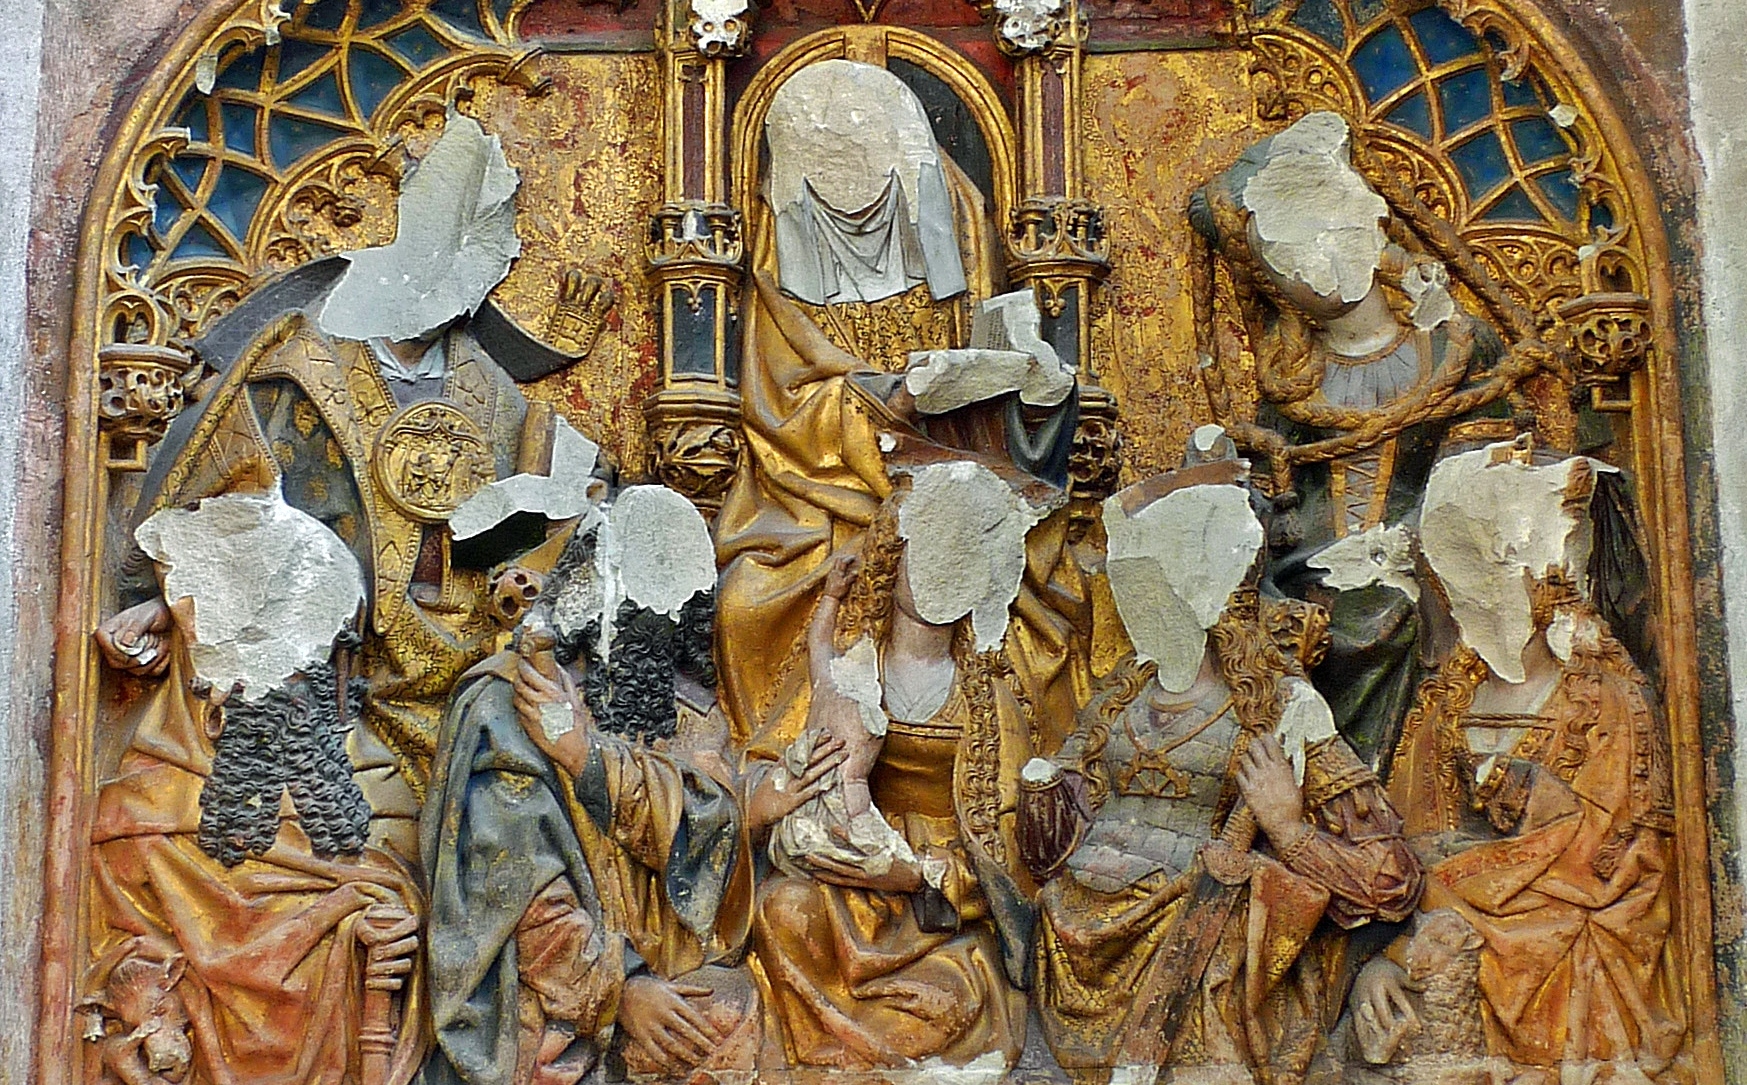 Relief in Utrecht Cathedral, desecrated in 1566 during the iconoclasm in the Netherlands  (a headless baby Jesus held by His now headless mother at center).